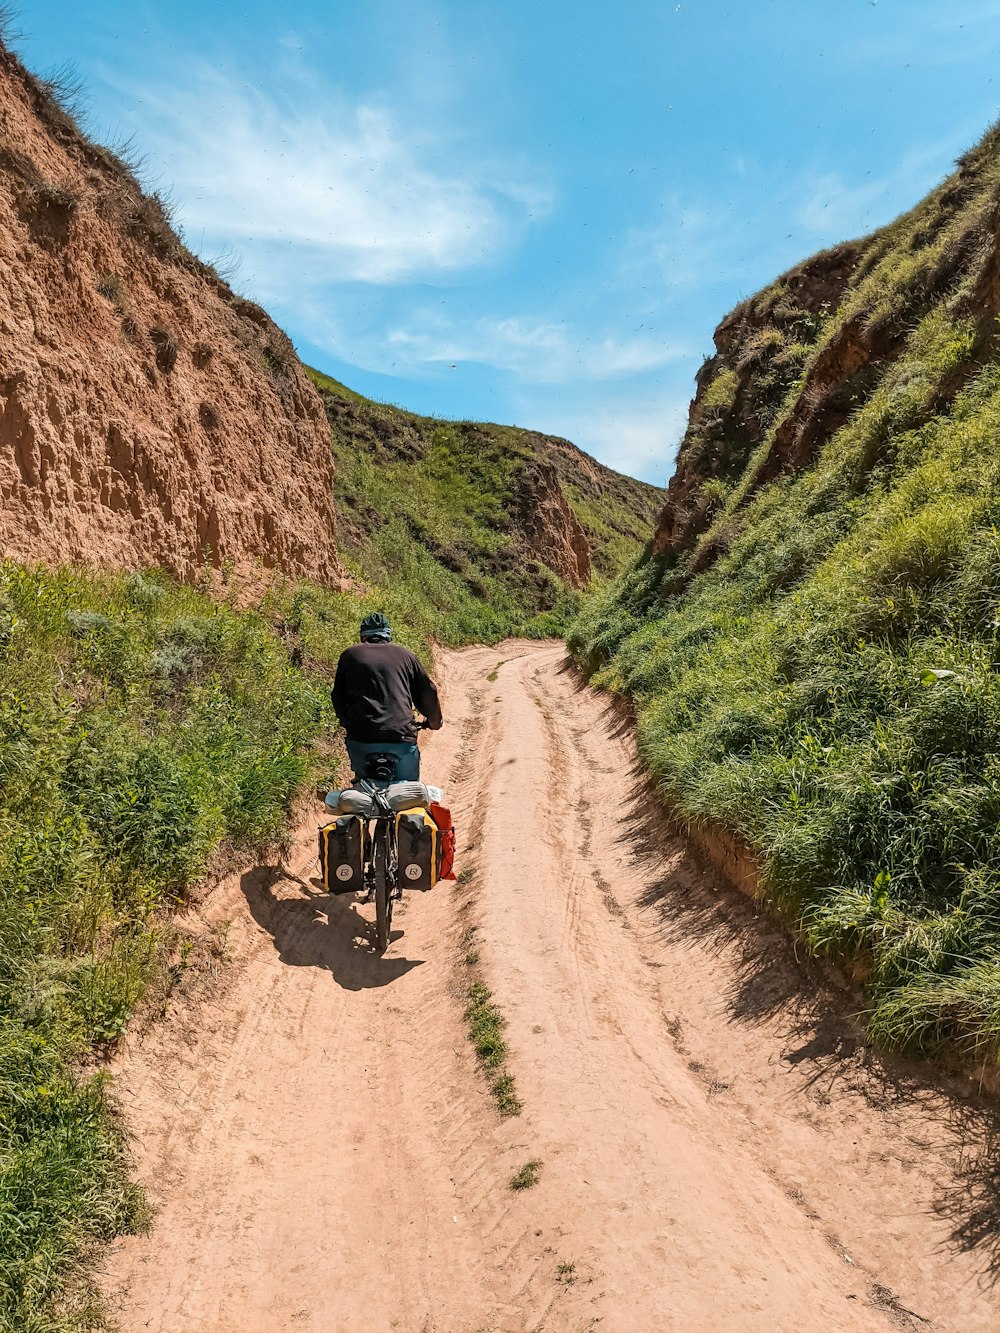 a man riding a motorcycle on a dirt road between mountains